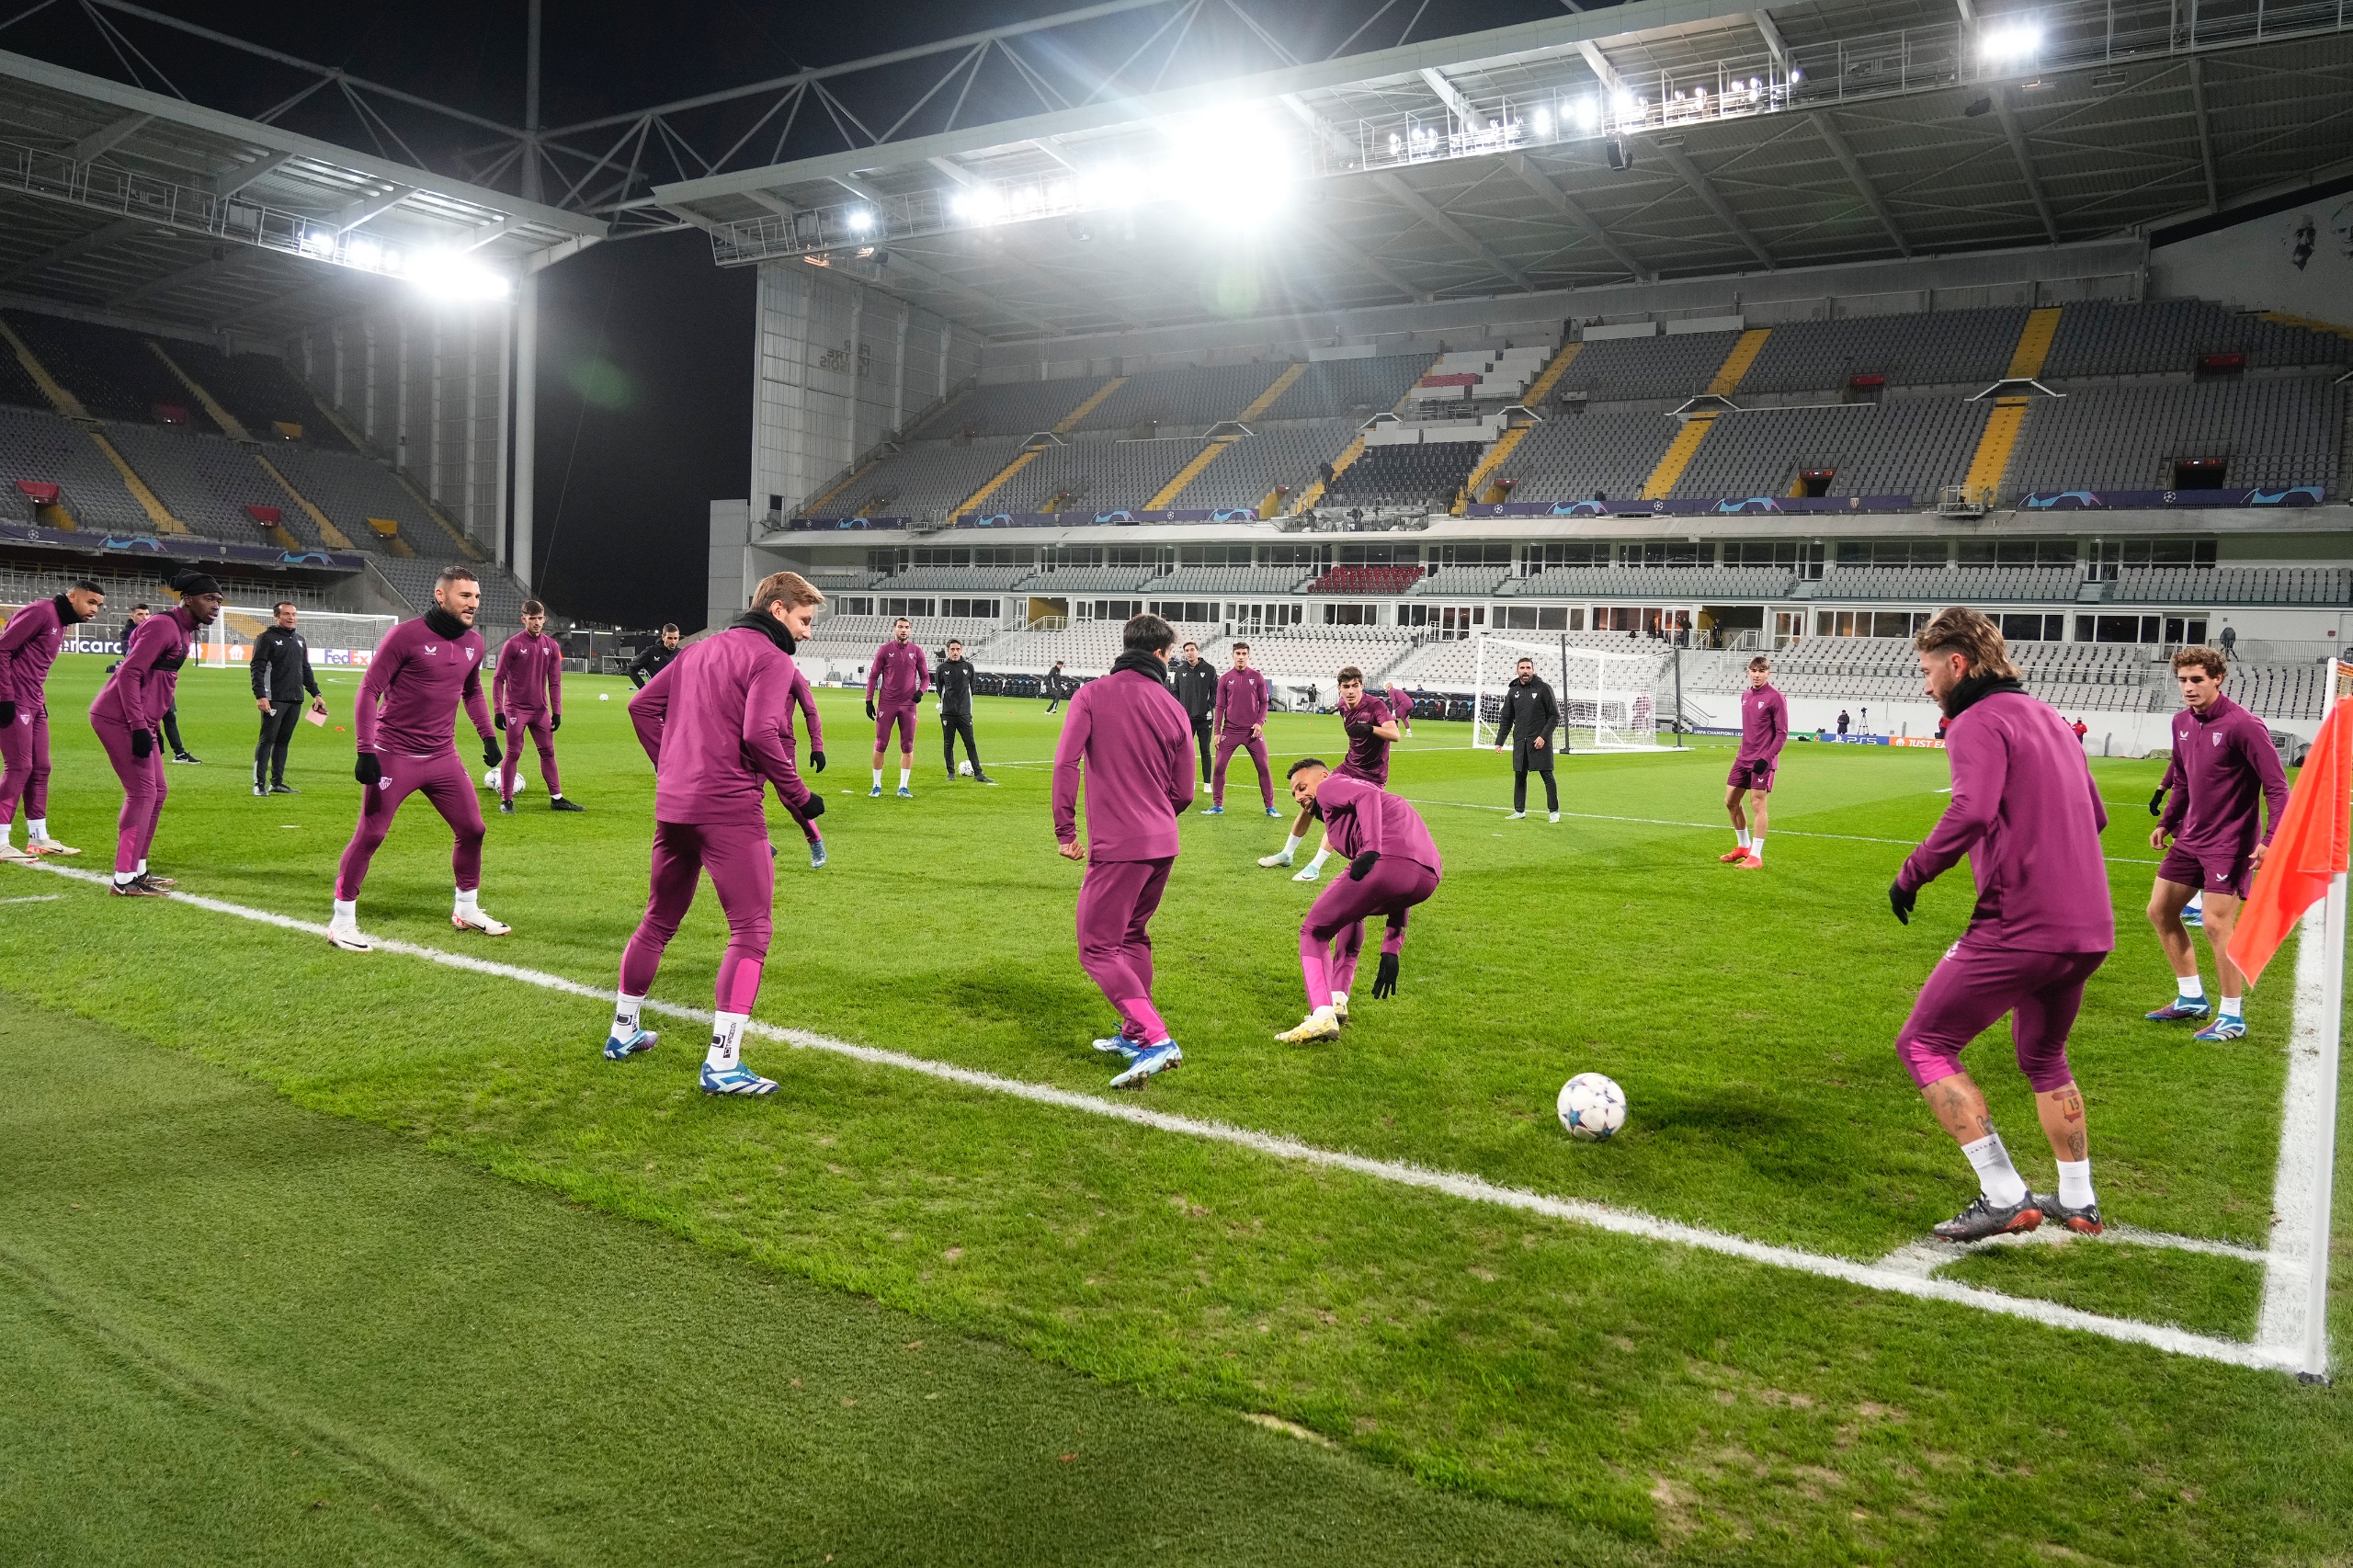 Training at the Stade Bollaert-Delelis